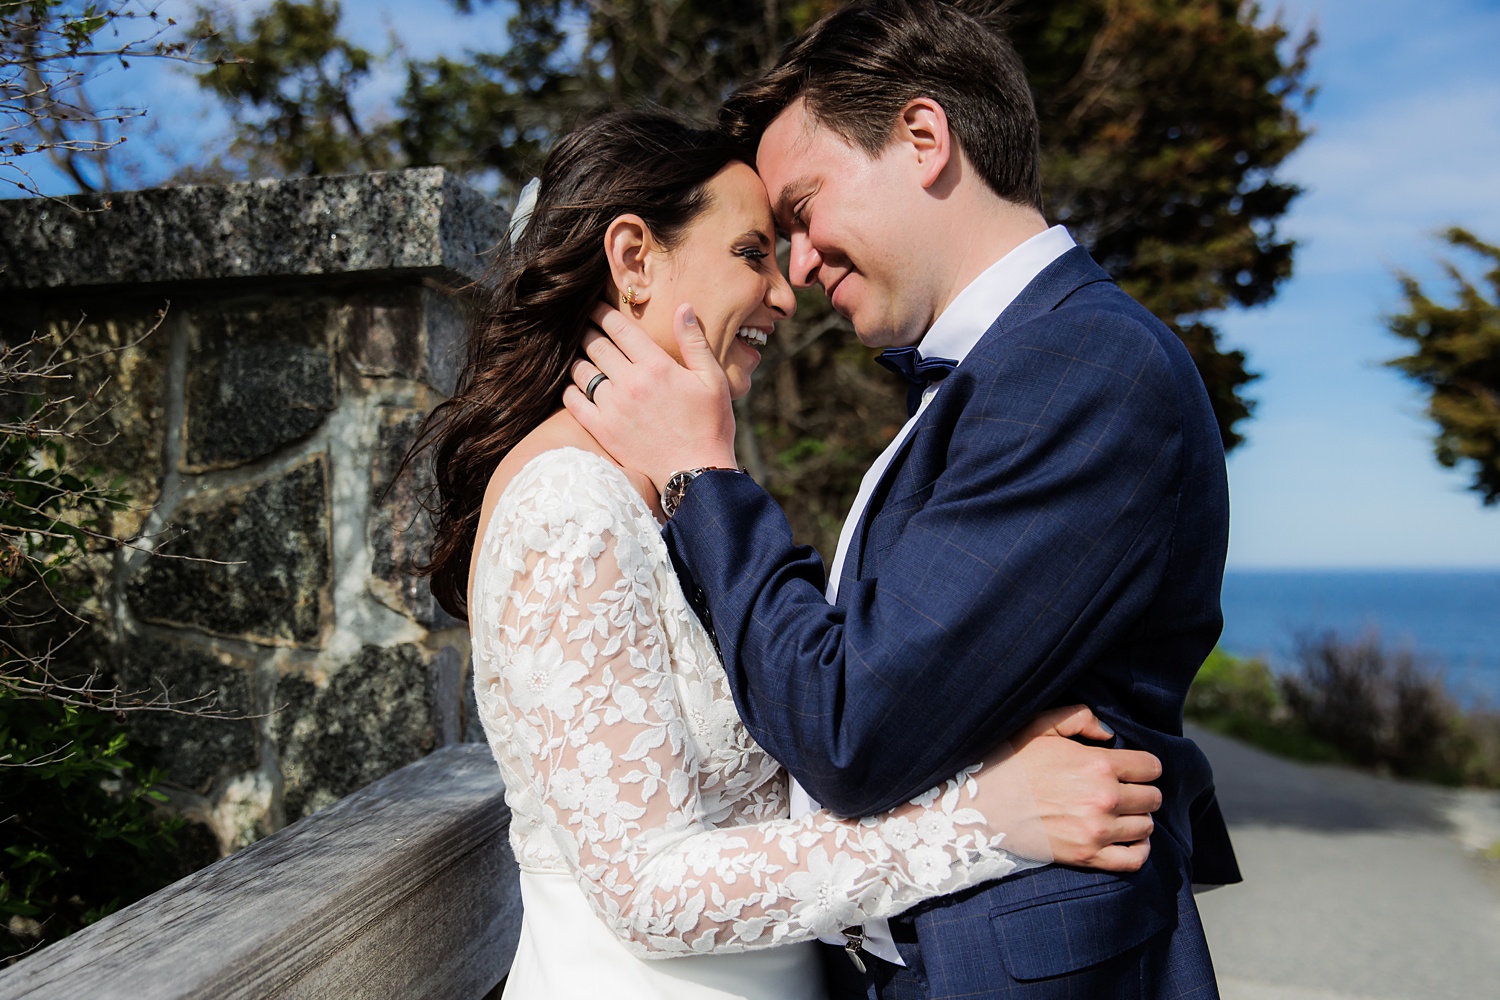 The couple can't stop smiling after a sunny Maine elopement